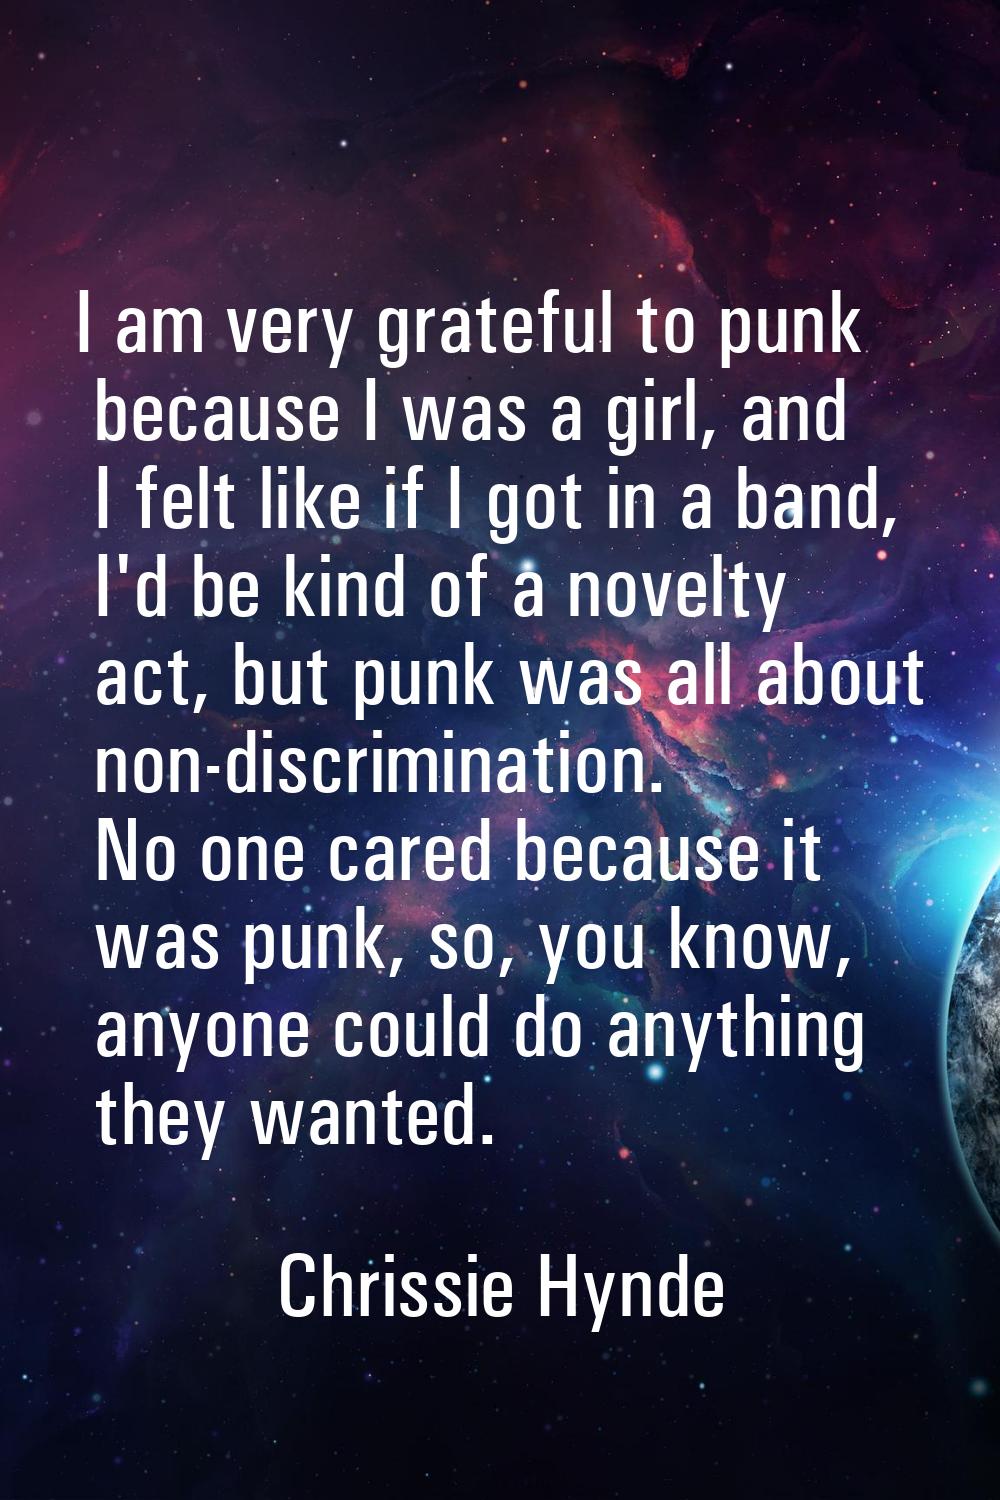 I am very grateful to punk because I was a girl, and I felt like if I got in a band, I'd be kind of